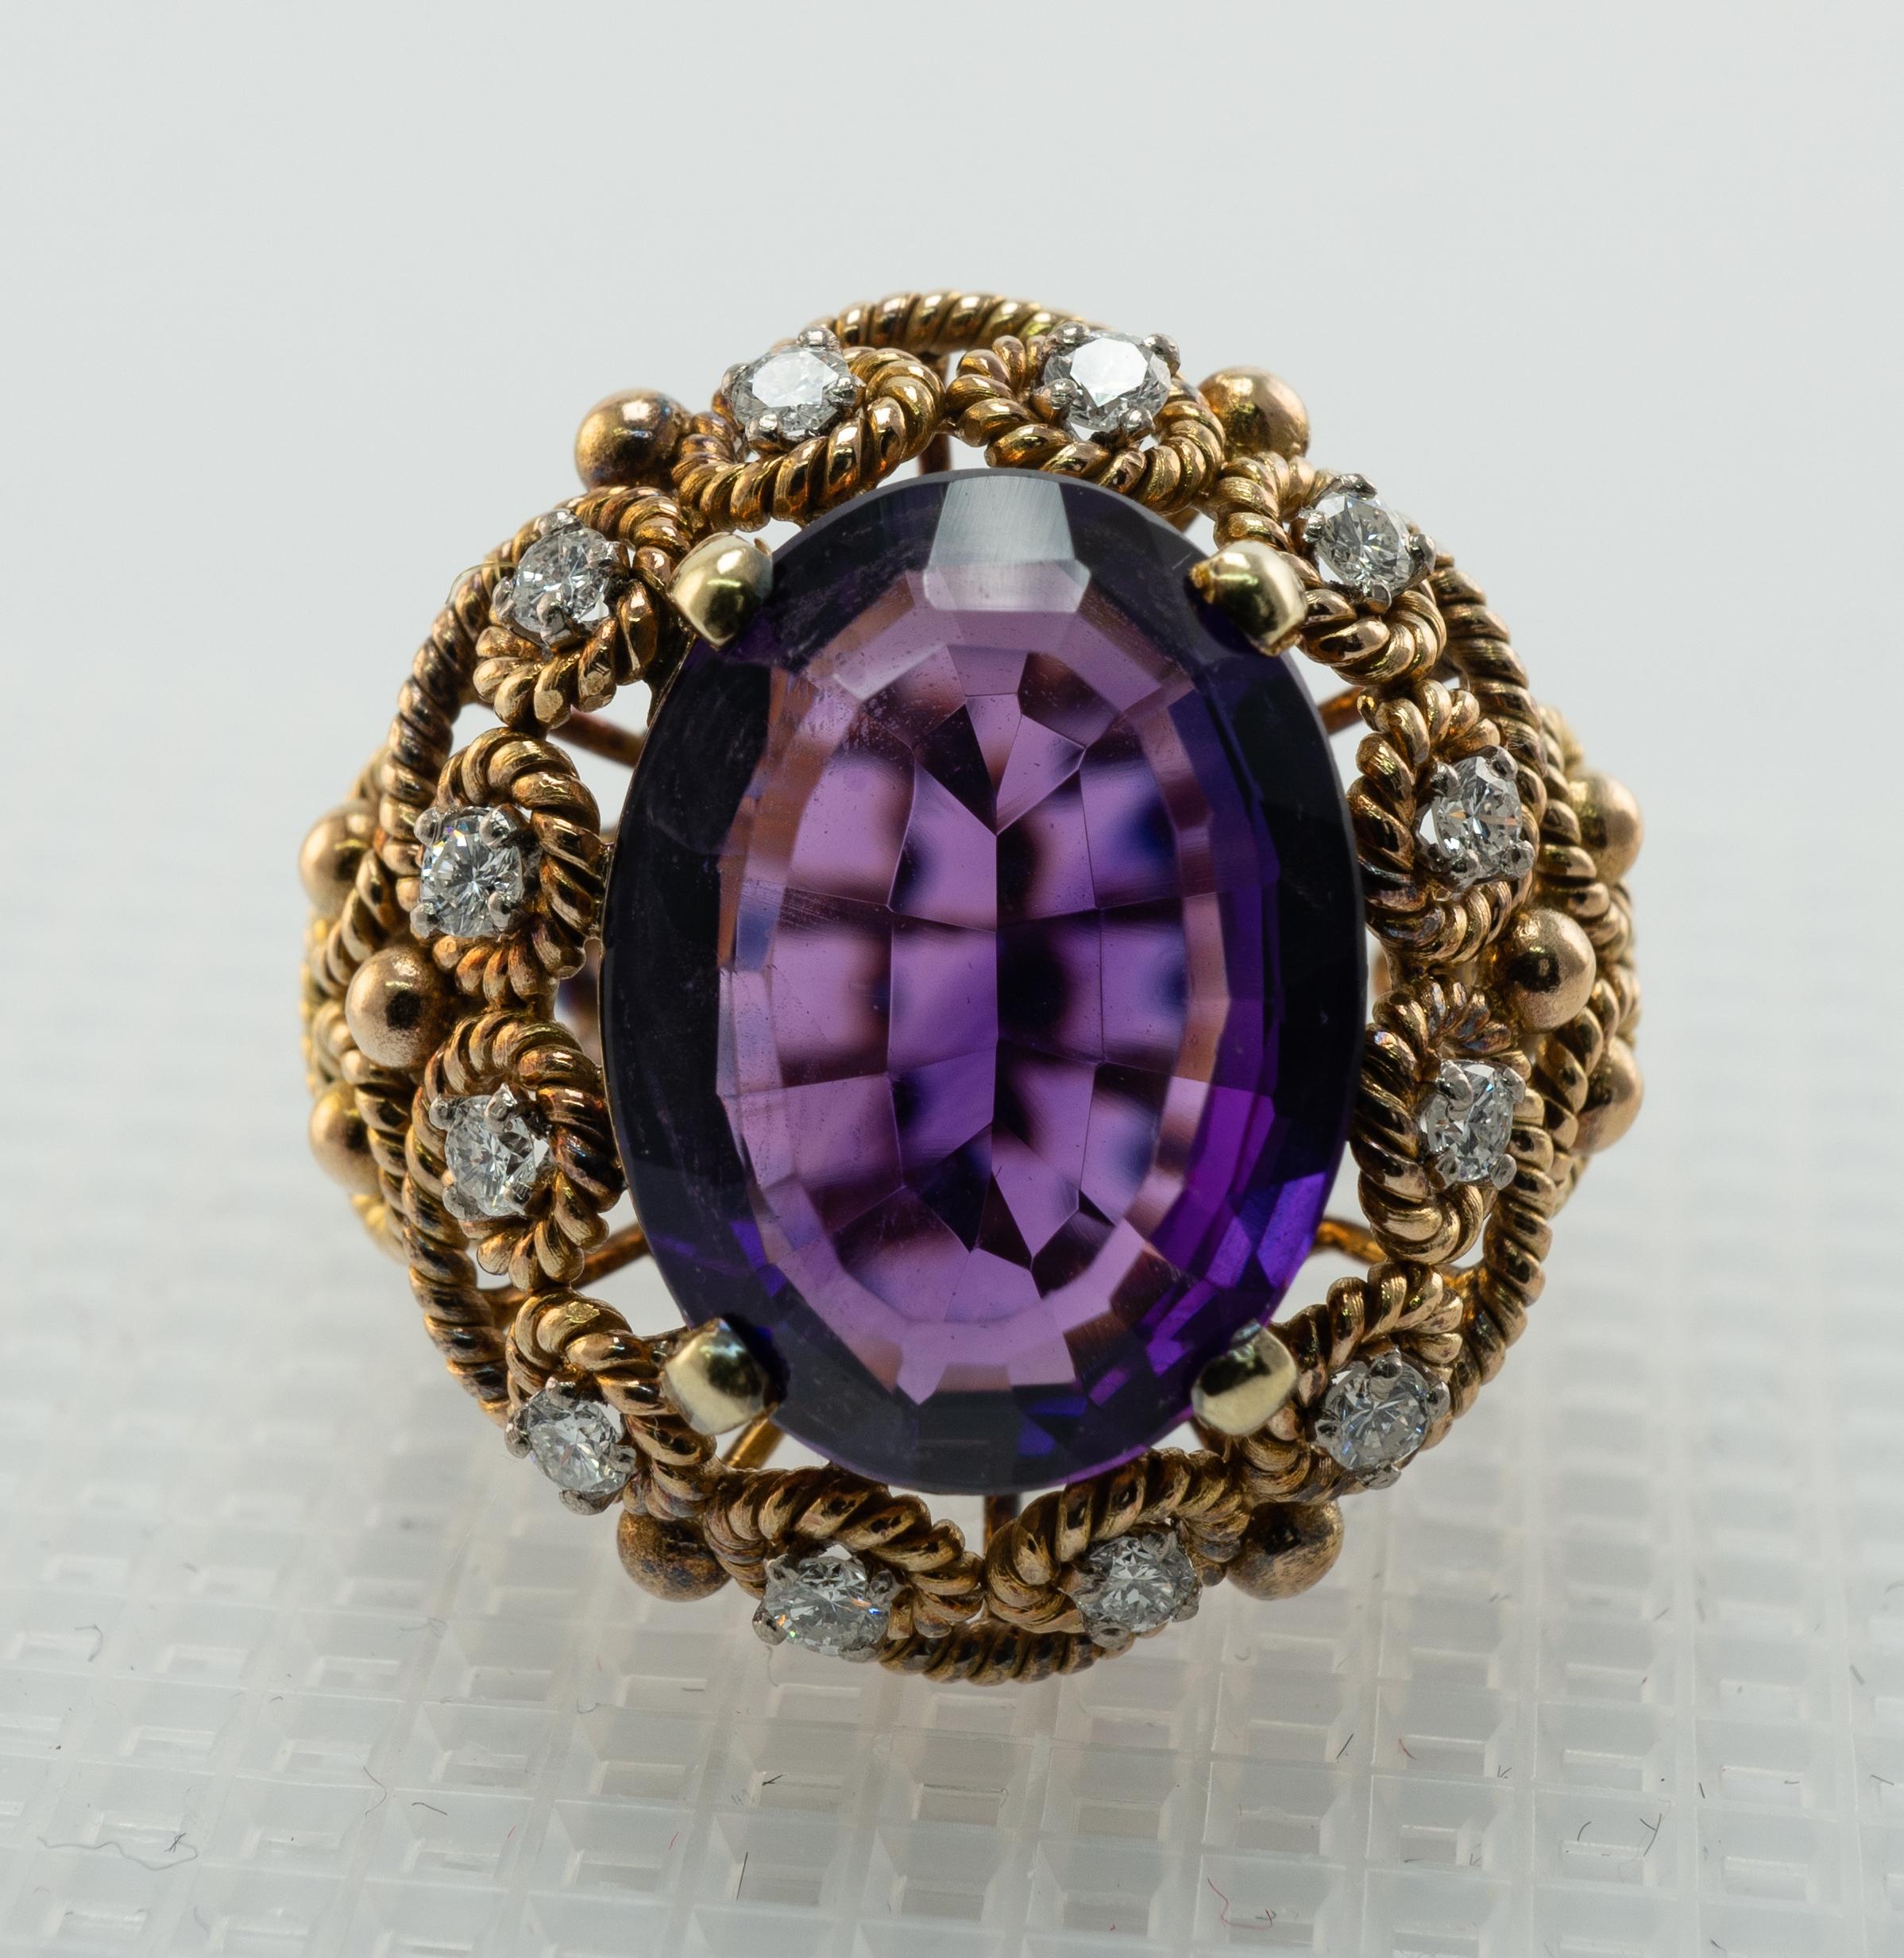 Natural Amethyst Diamond Ring 14K Gold Cocktail Vintage

This stunning vintage ring is finely crafted in solid 14K Yellow Gold (carefully tested and guaranteed) and set with genuine Earth mined Amethyst and Diamonds. 
The center oval cut gem